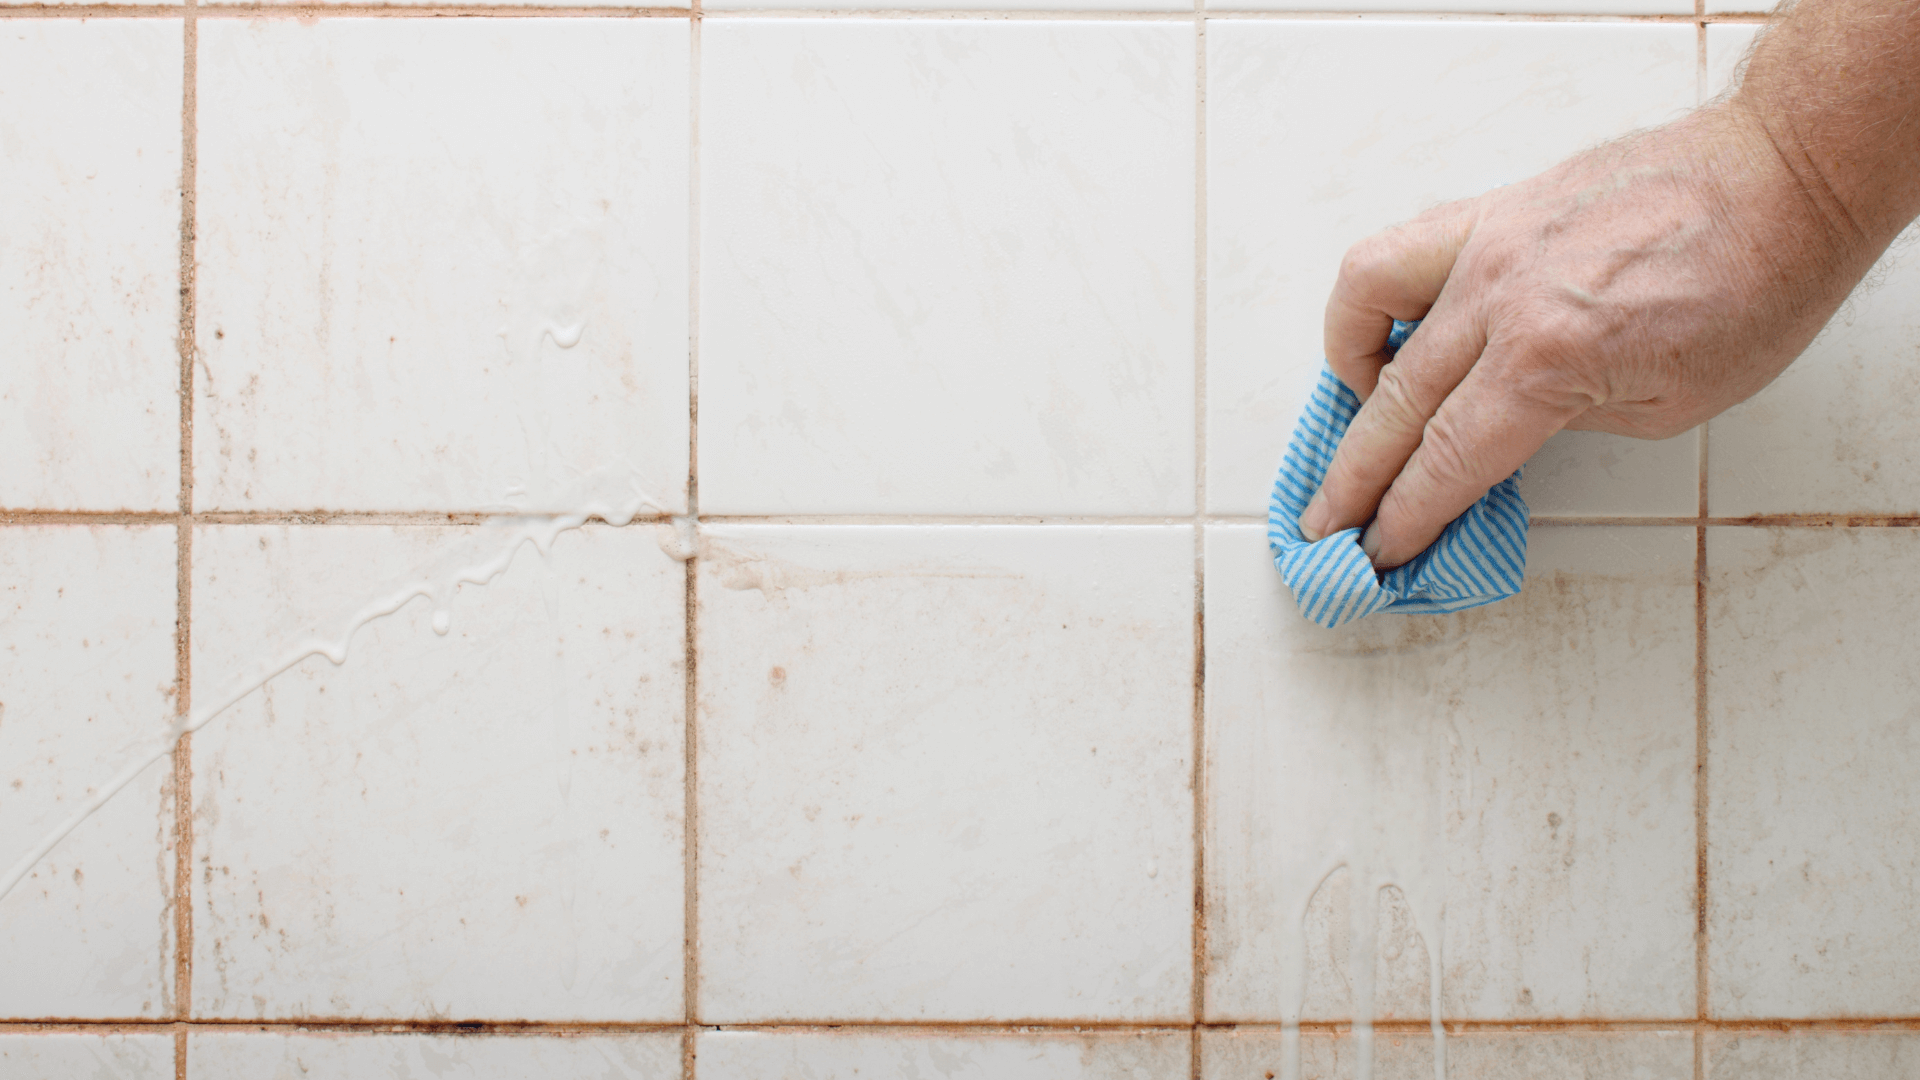 Remove odors of your bathrooms by deep cleaning the toilet. Scrubbing and rinsing hard surfaces.